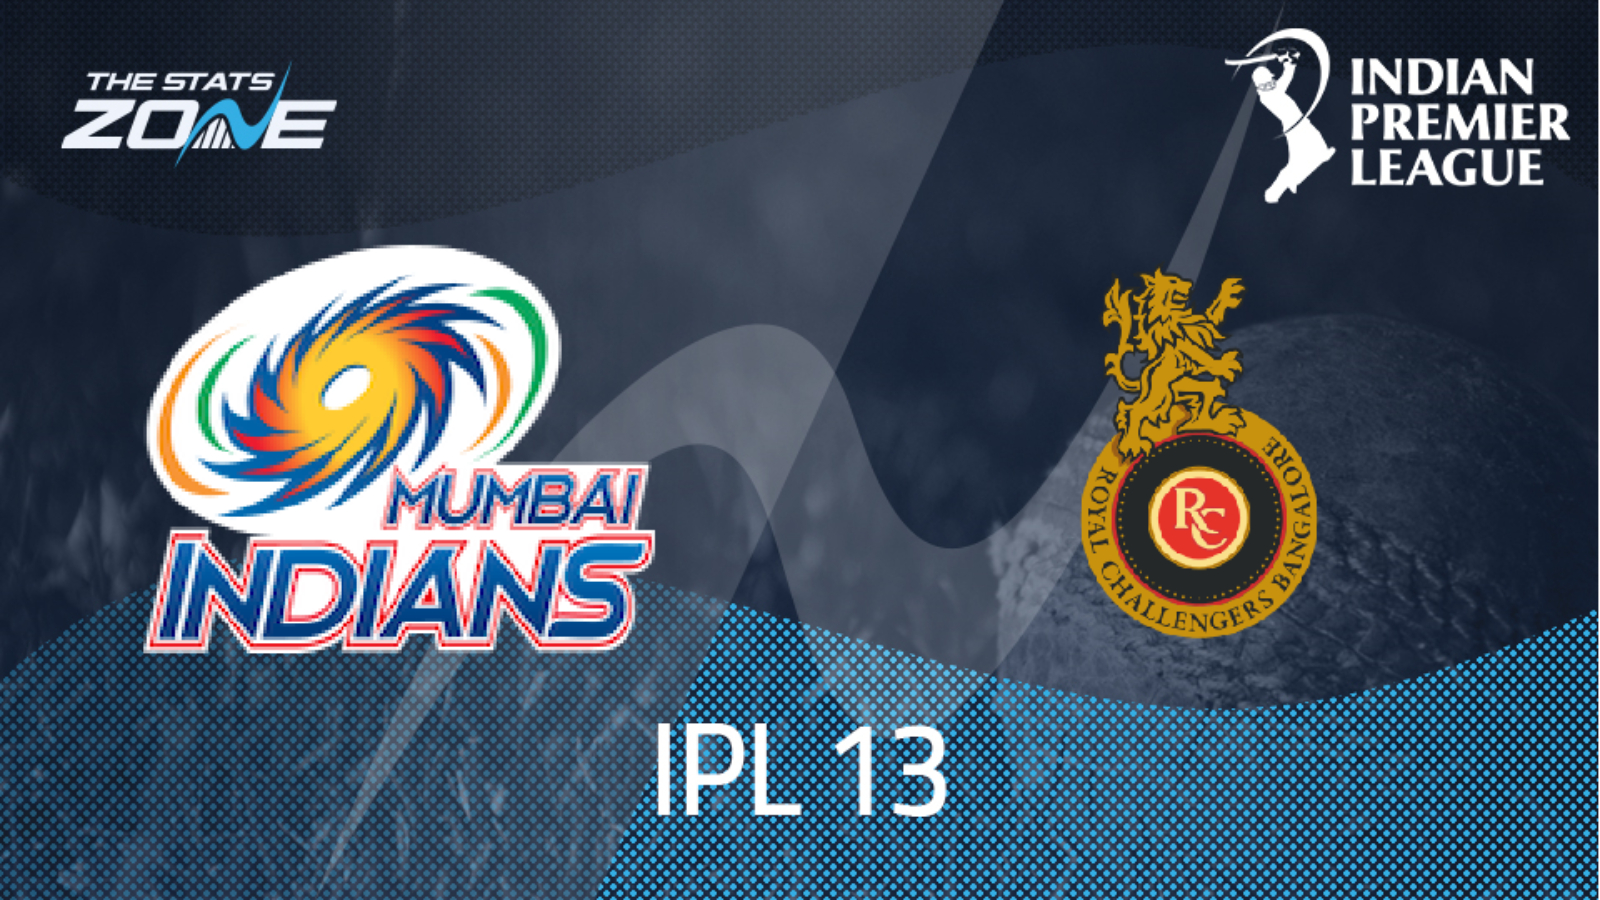 Ipl 2020 Mumbai Indians Vs Royal Challengers Bangalore Preview And Prediction The Stats Zone 